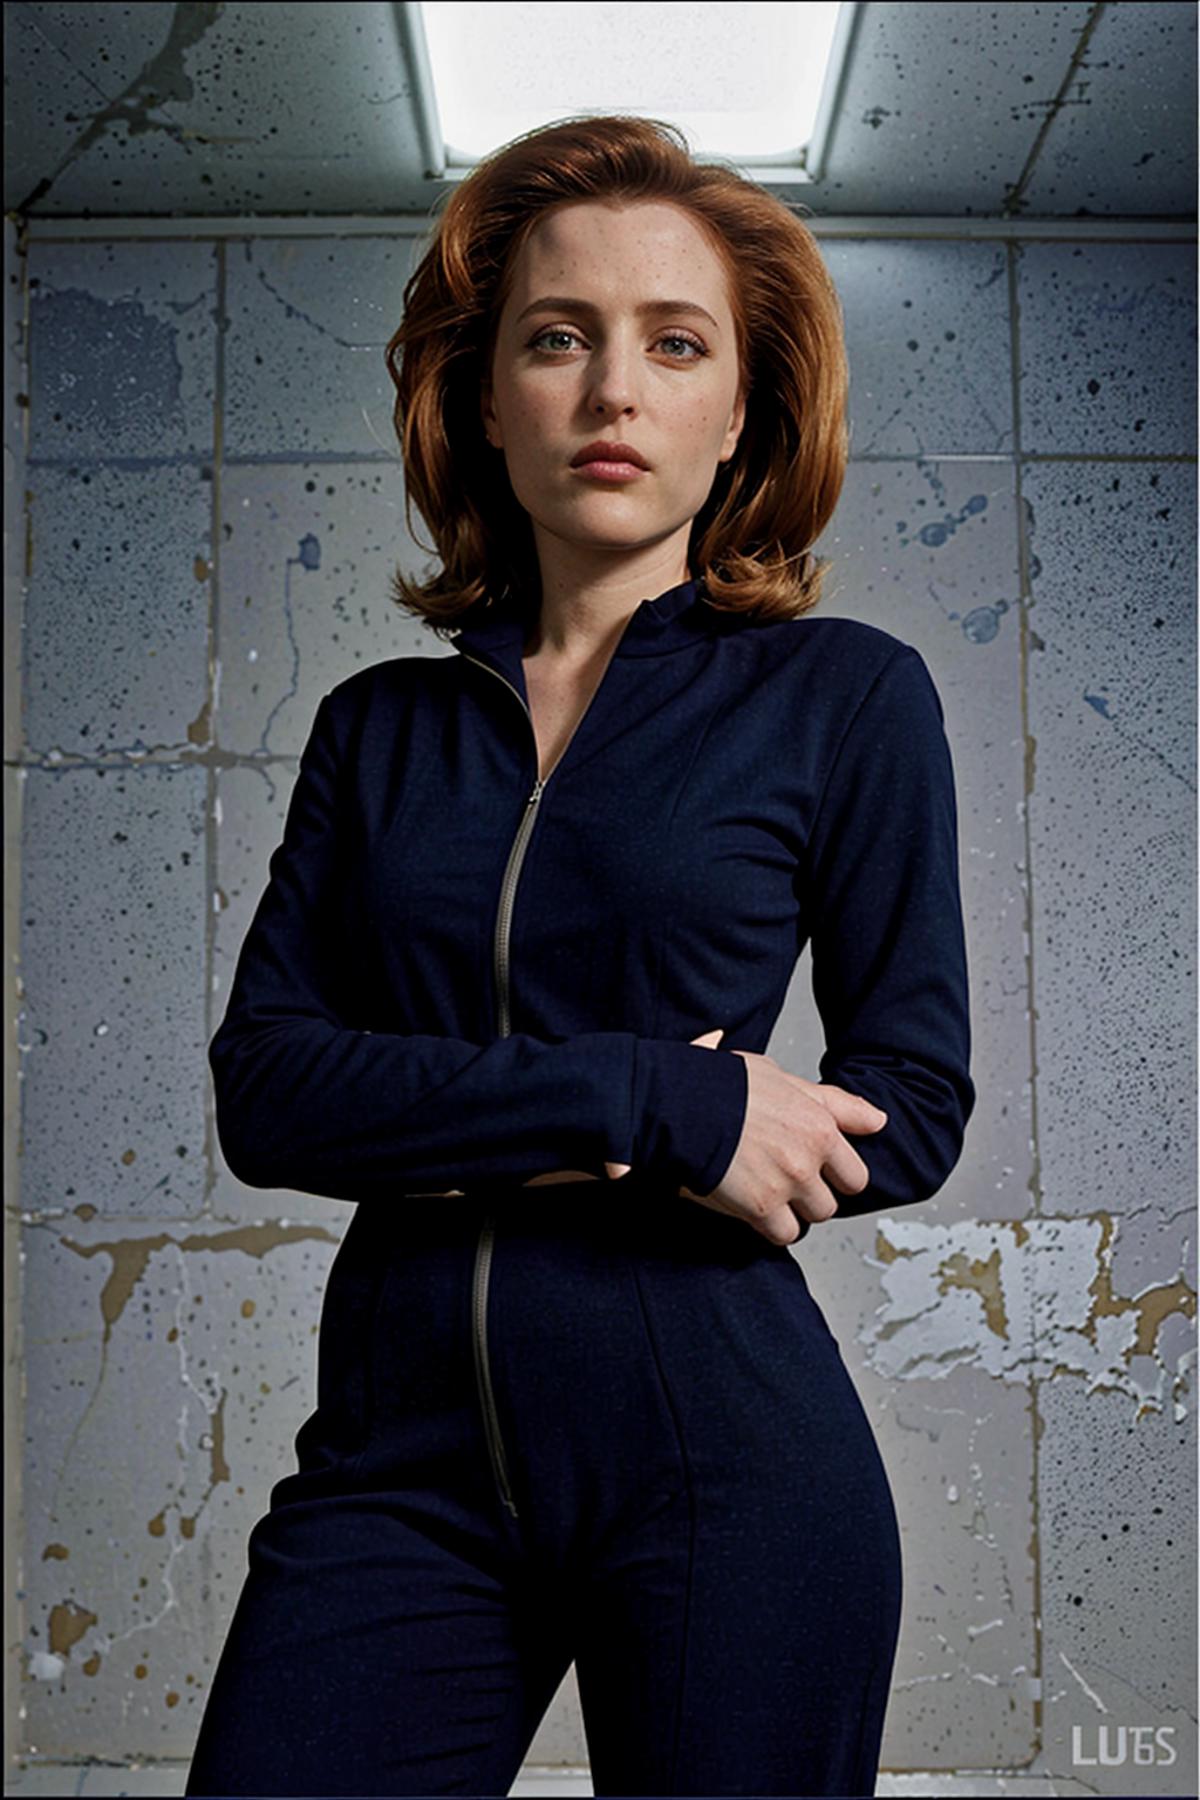 Dana Scully Character LoRA SD image by dbst17